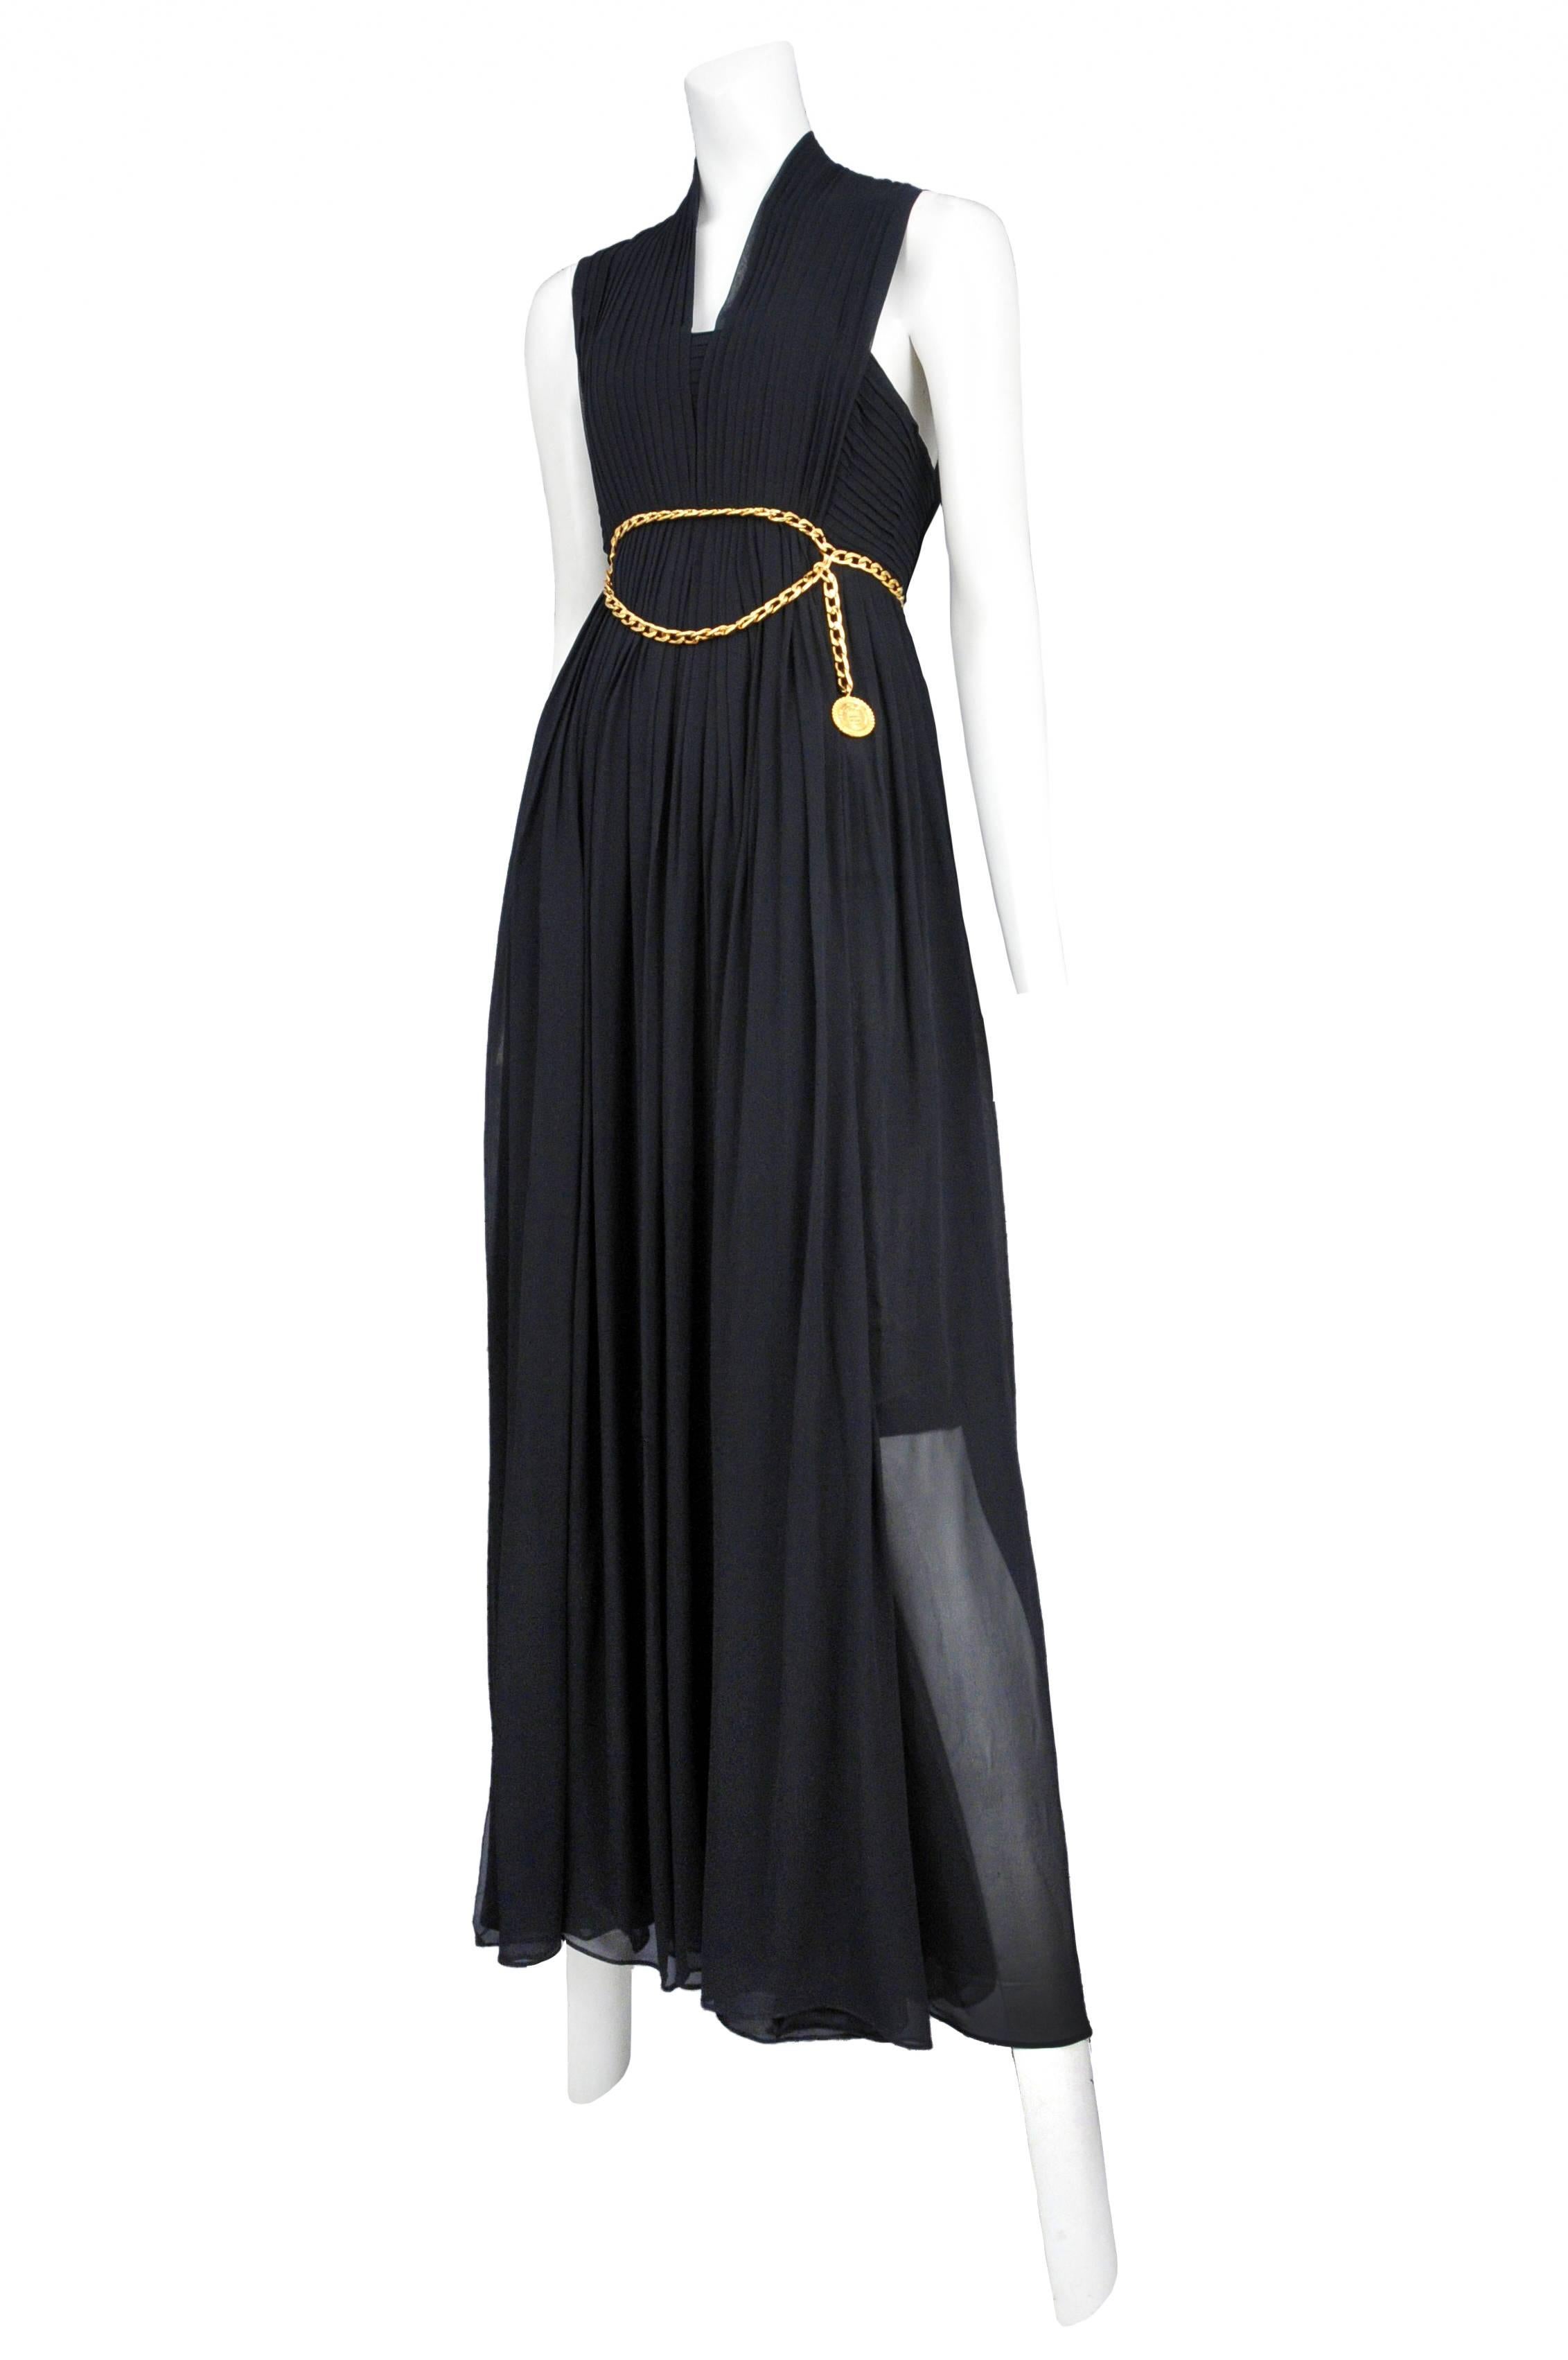 Chanel black chiffon knife pleat gown with flat gold link chain belt detail and open back with tiny gold Chanel buttons, lined with a half slip. 